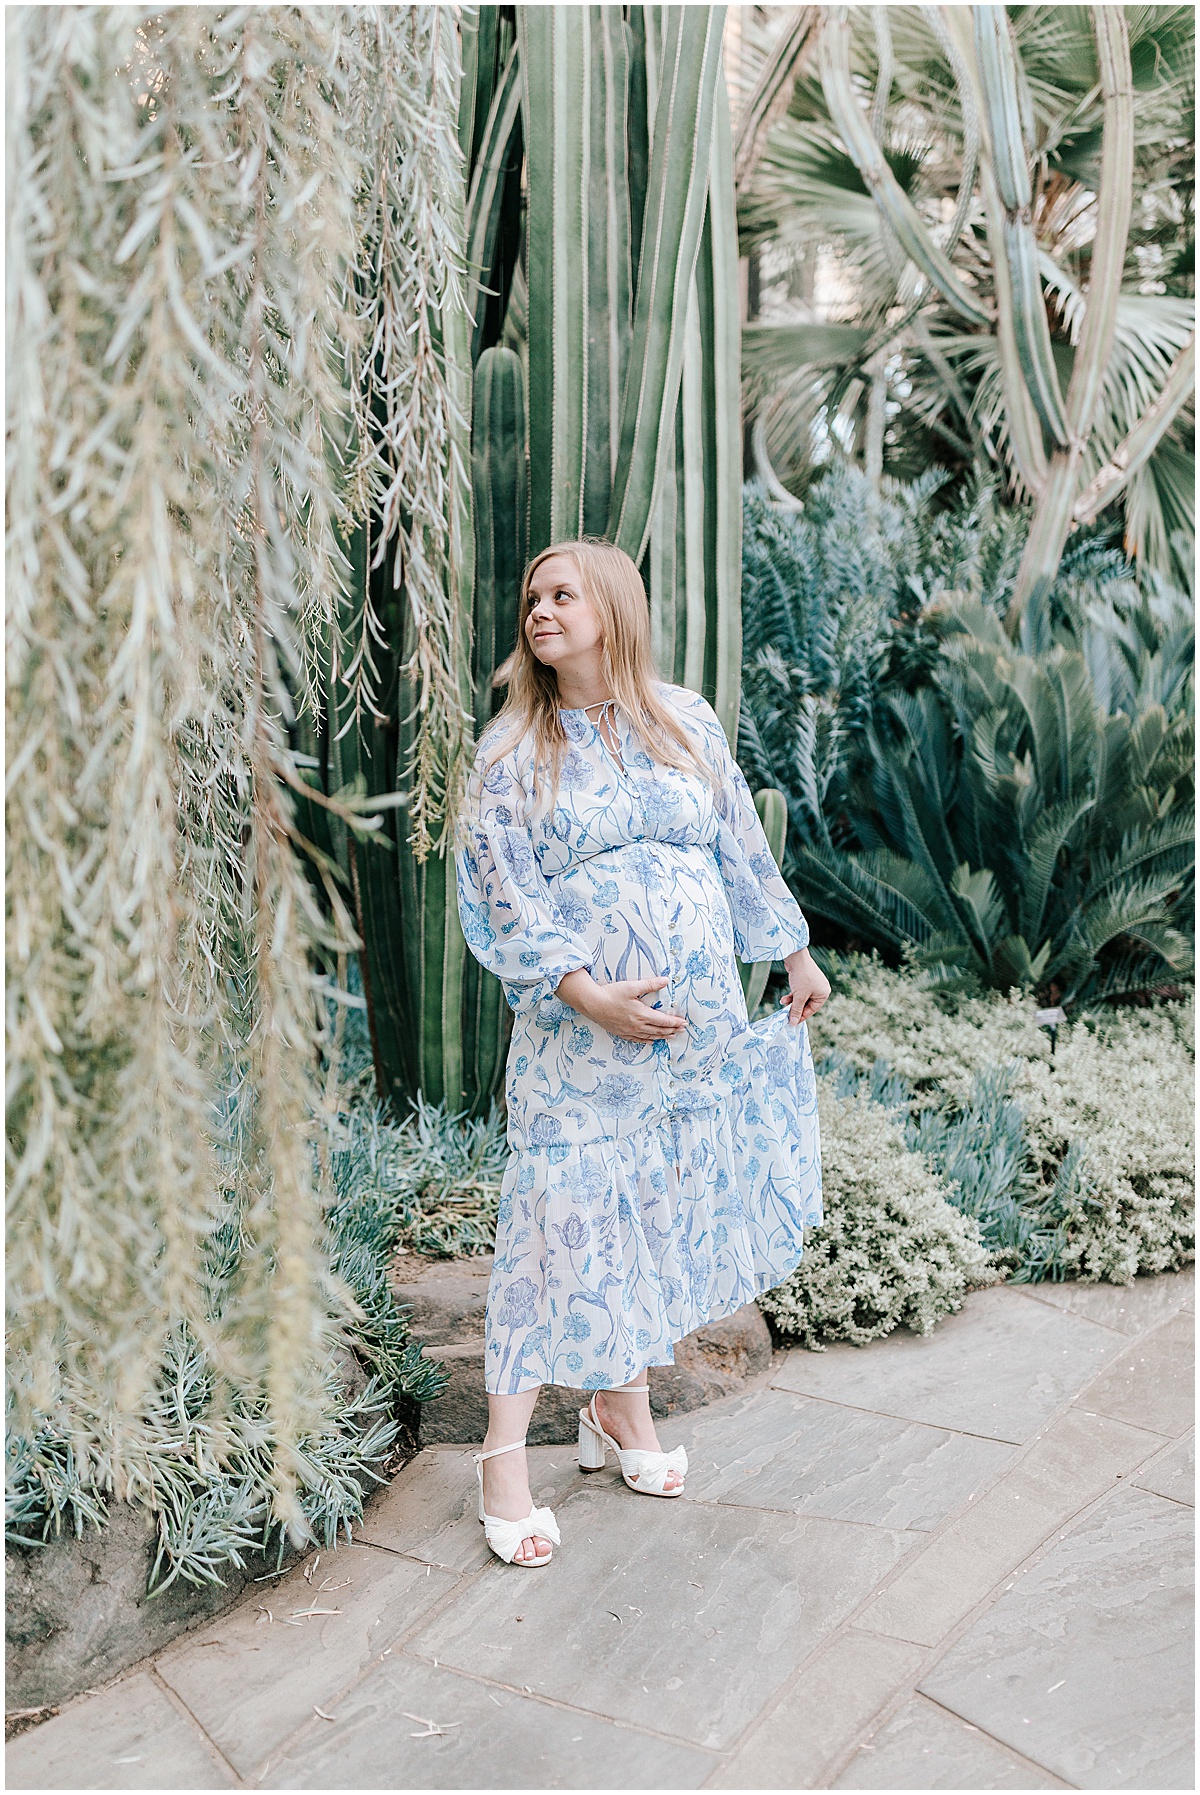 Longwood gardens maternity portraits with Katie for her baby boy. Katie is seen wearing a blue maternity dress surrounded by the greenery of the botanical gardens